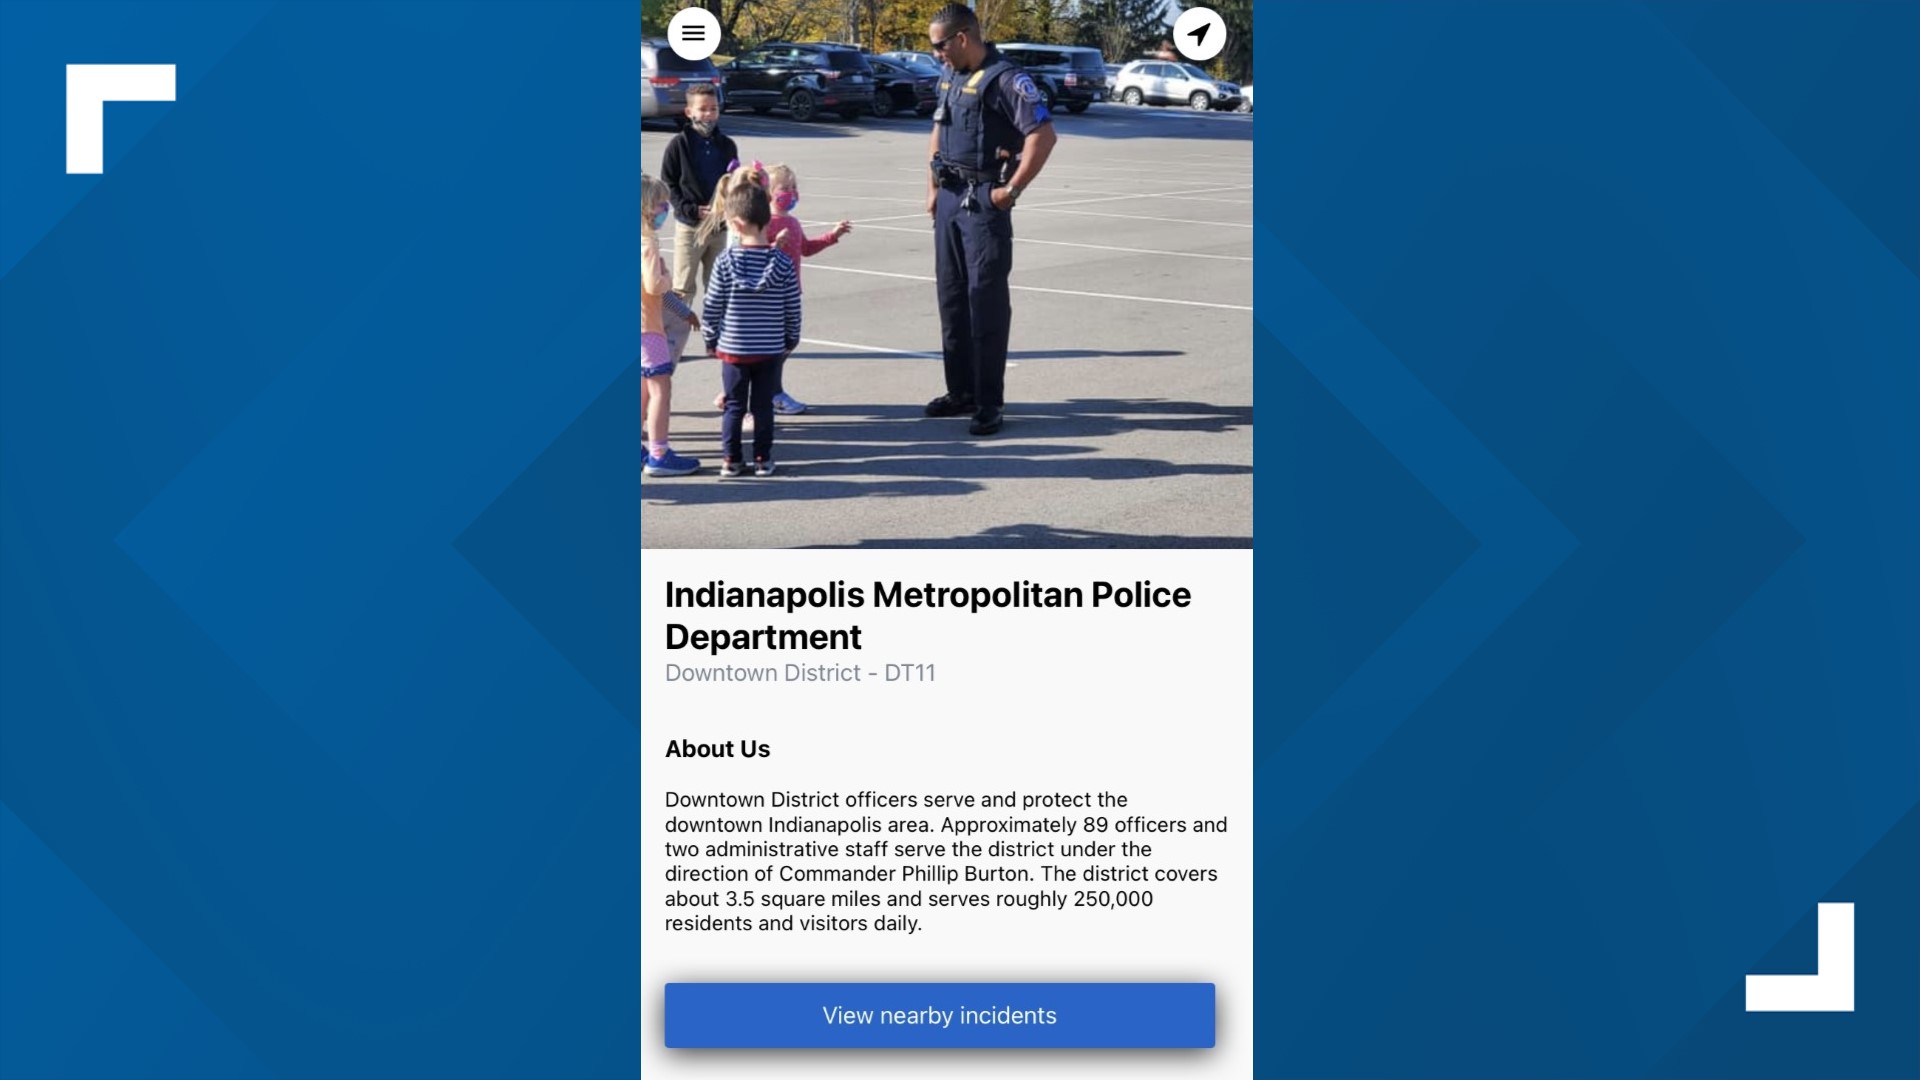 The Community Movement Forward app aims to reimagine the way law enforcement and communities can work together to create safer neighborhoods.